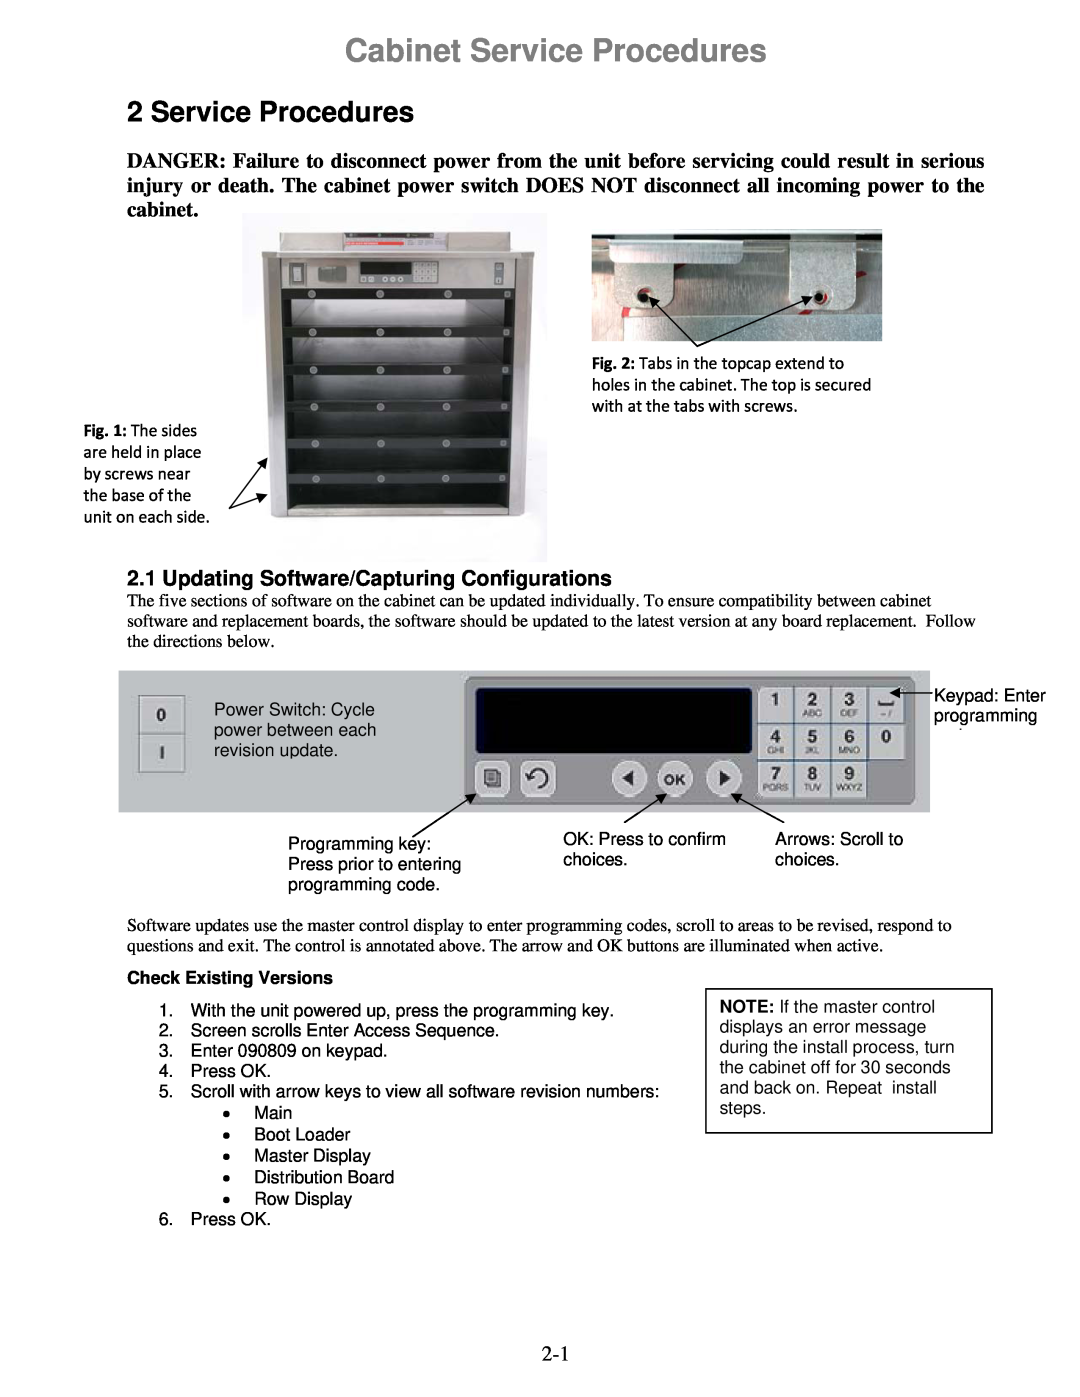 Frymaster 8196606 manual Cabinet Service Procedures, Updating Software/Capturing Configurations, Check Existing Versions 